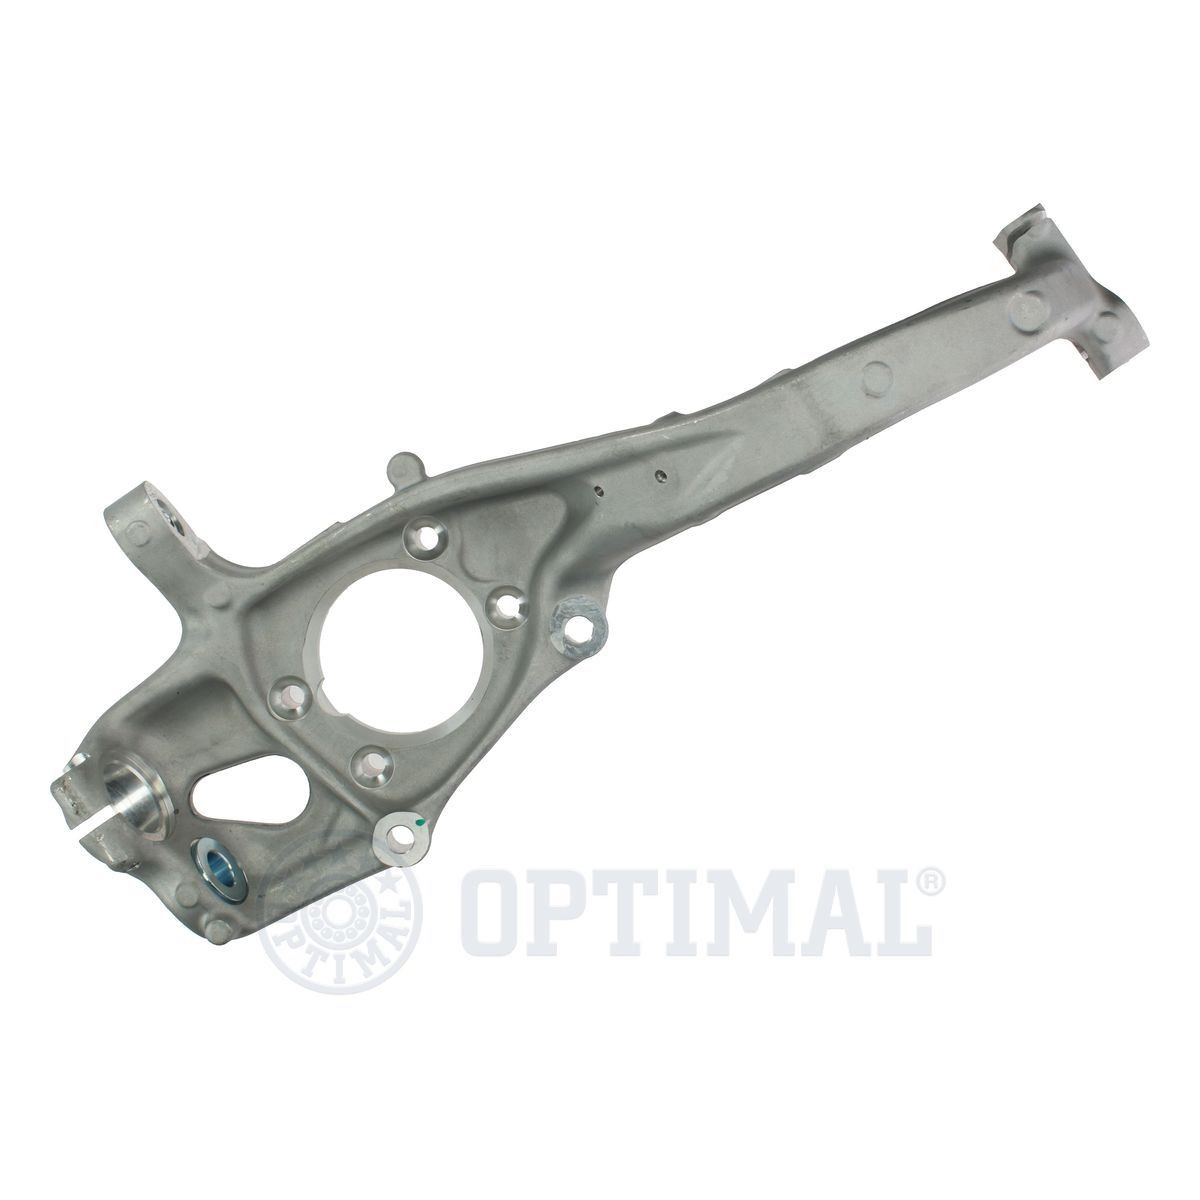 Original KN-100550-03-R OPTIMAL Steering knuckle experience and price